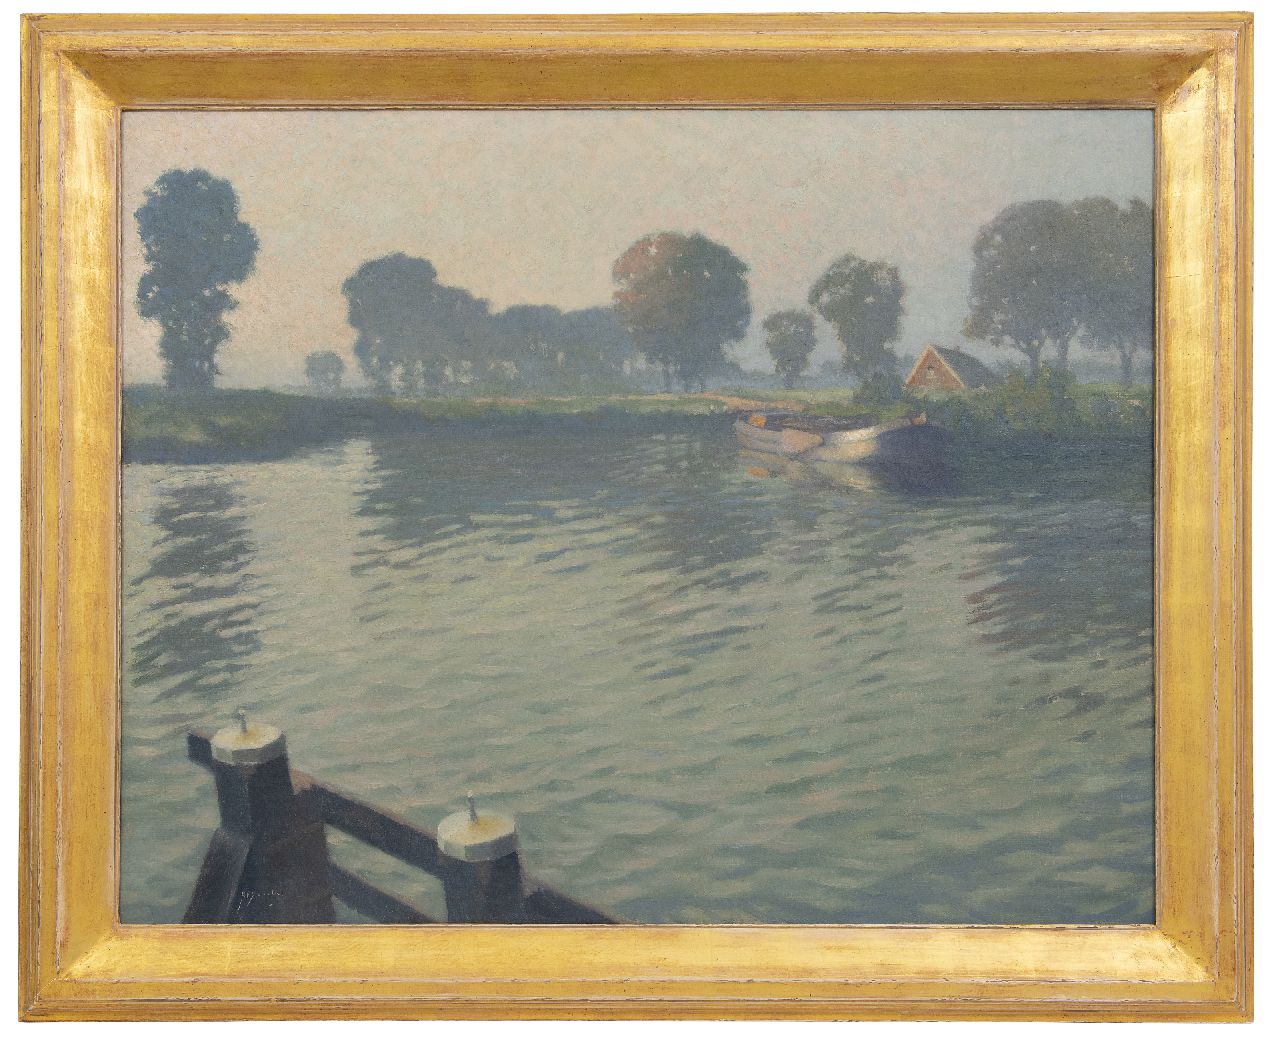 Schotel A.P.  | Anthonie Pieter Schotel | Paintings offered for sale | A moored barge near Muiden, oil on canvas 80.2 x 100.5 cm, signed l.l.